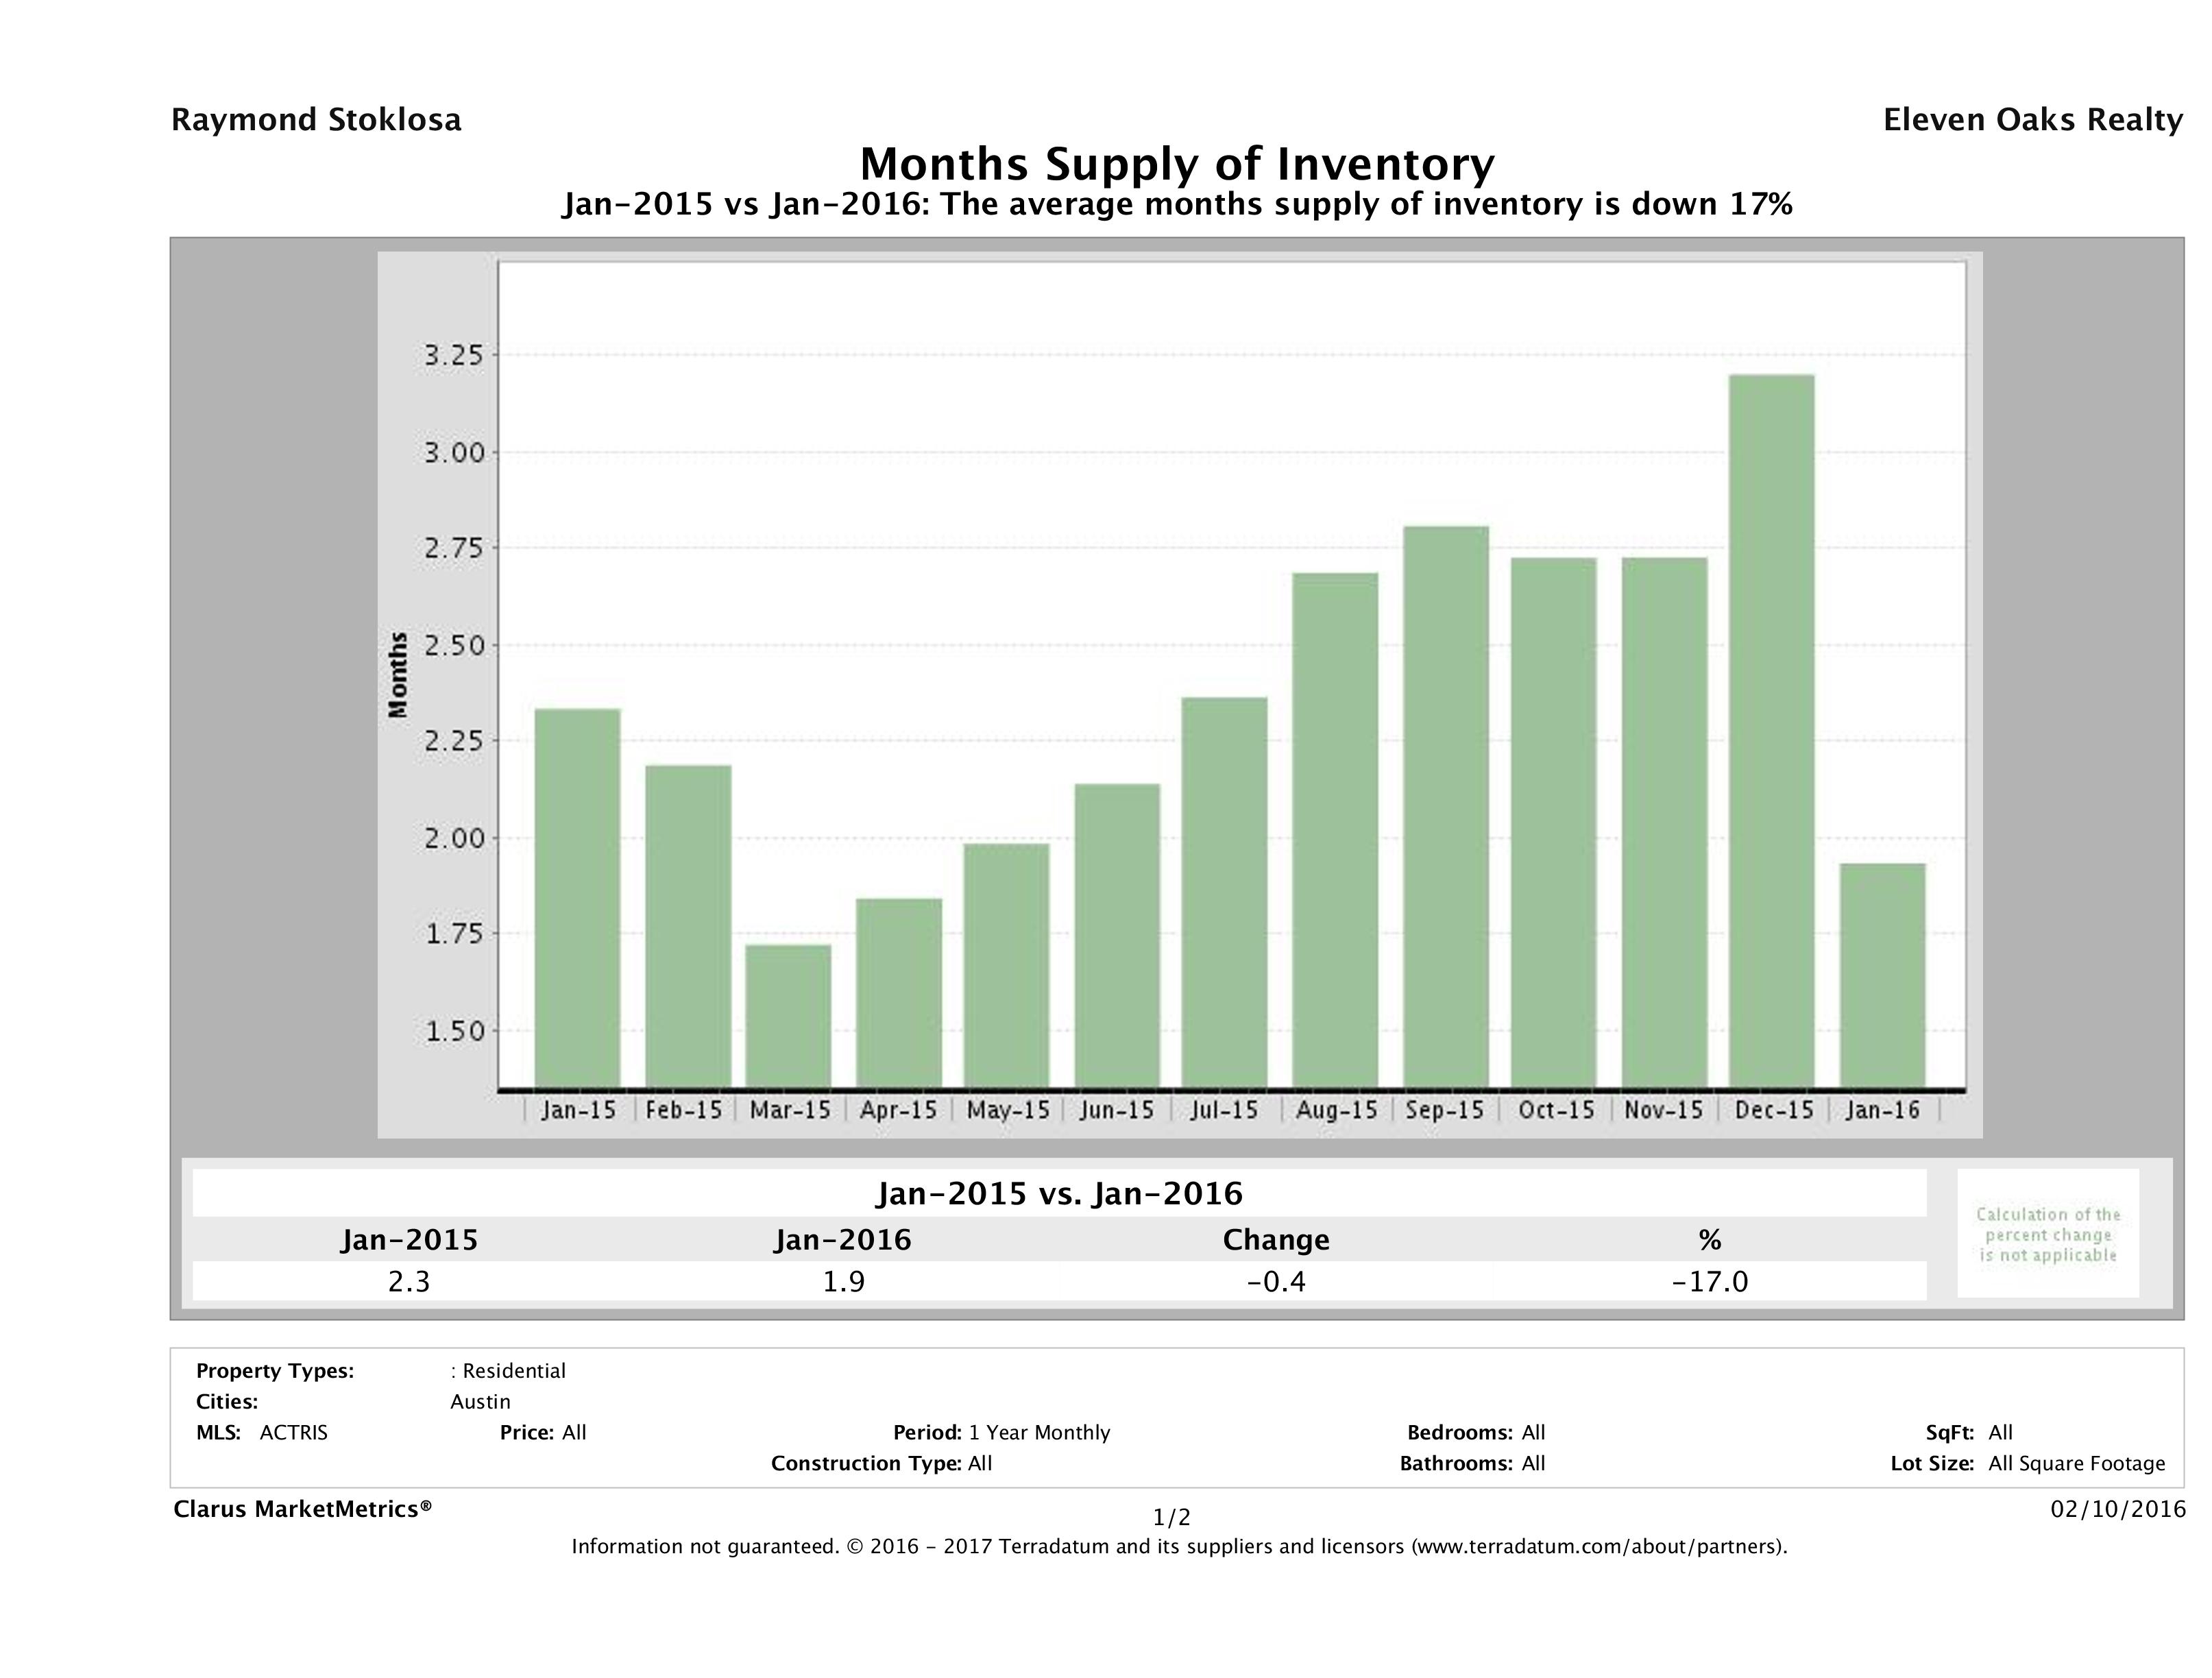 Austin single family home months inventory January 2016